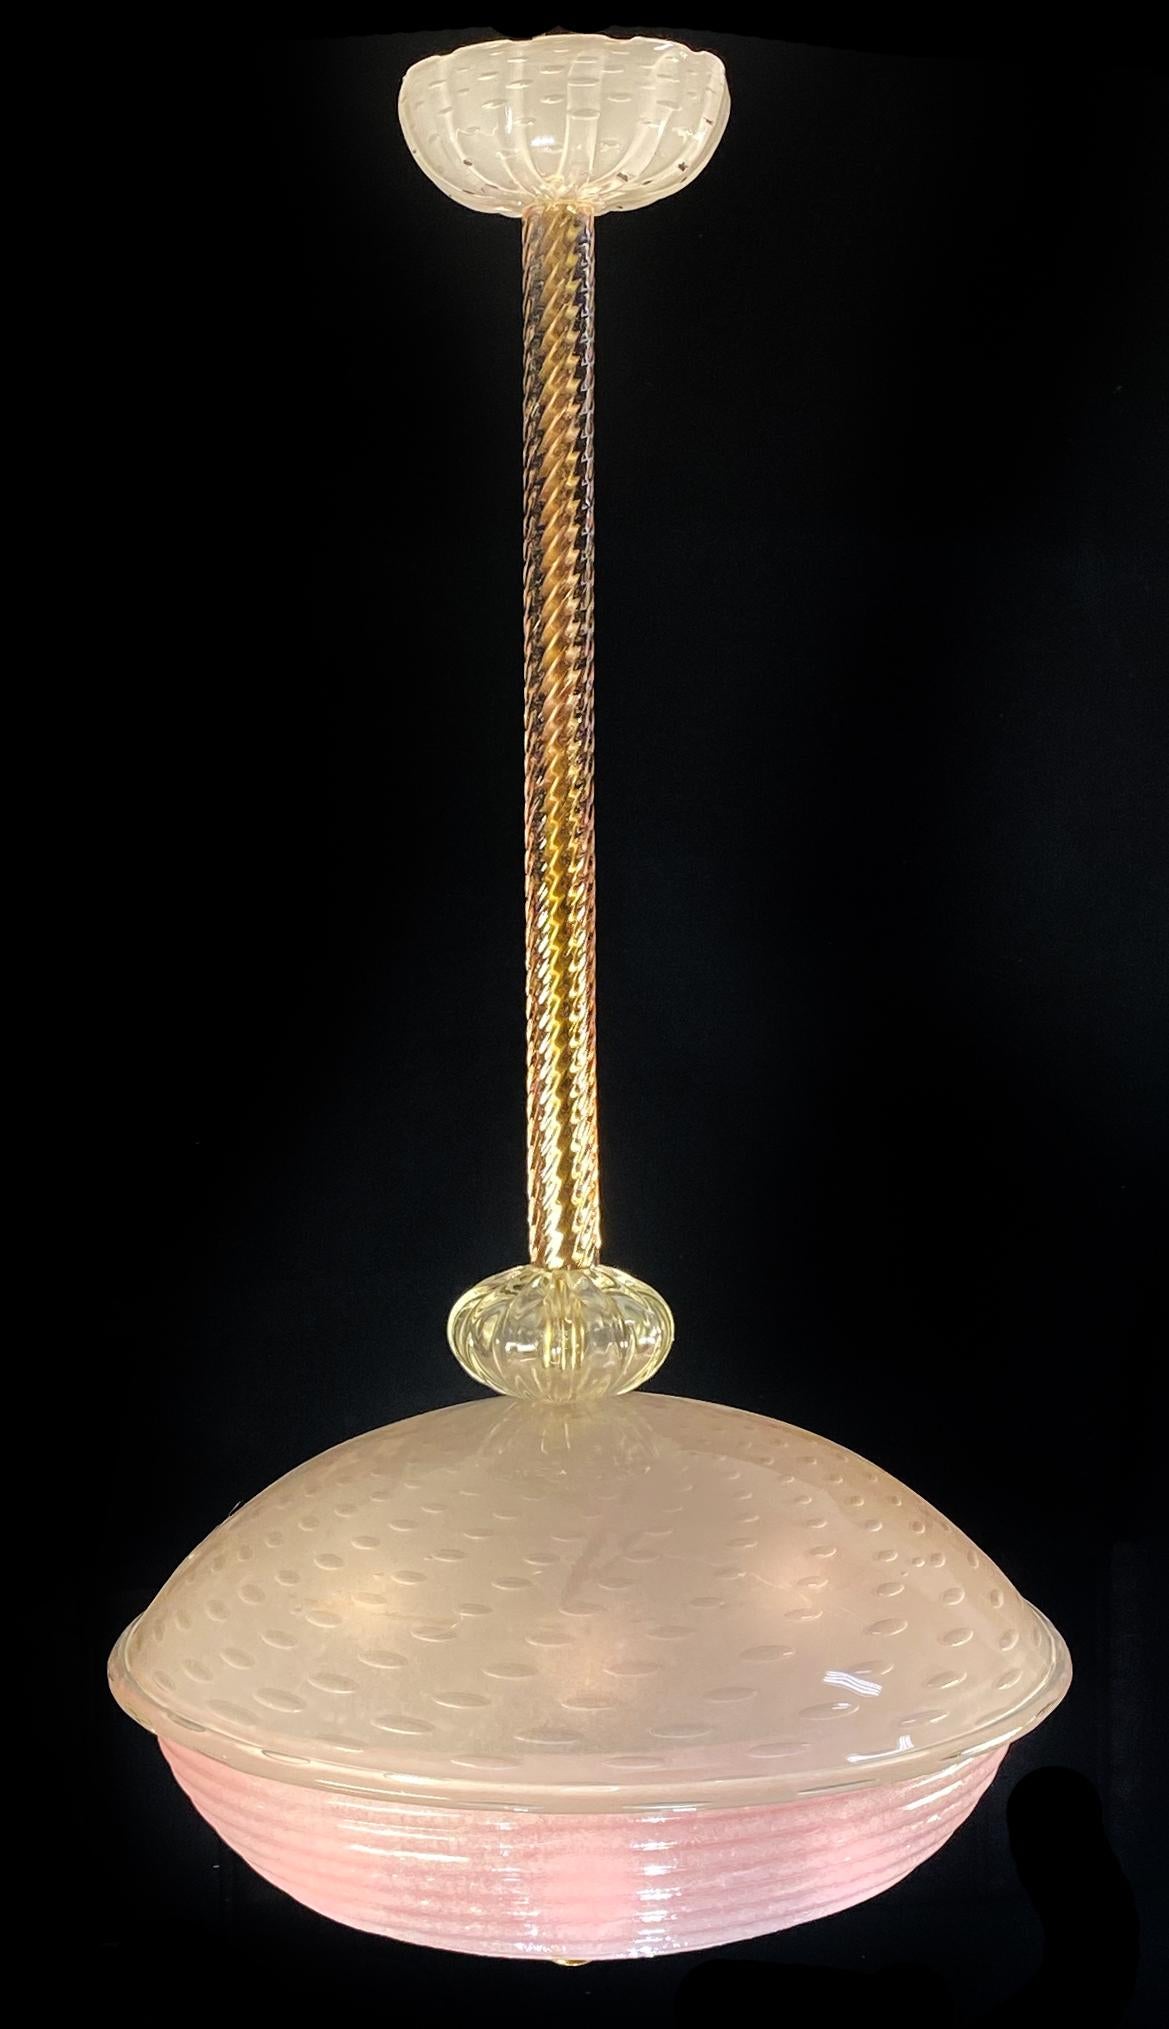 Charming Pink Glass Lantern Chandelier by Barovier & Toso, Murano, 1940 For Sale 10